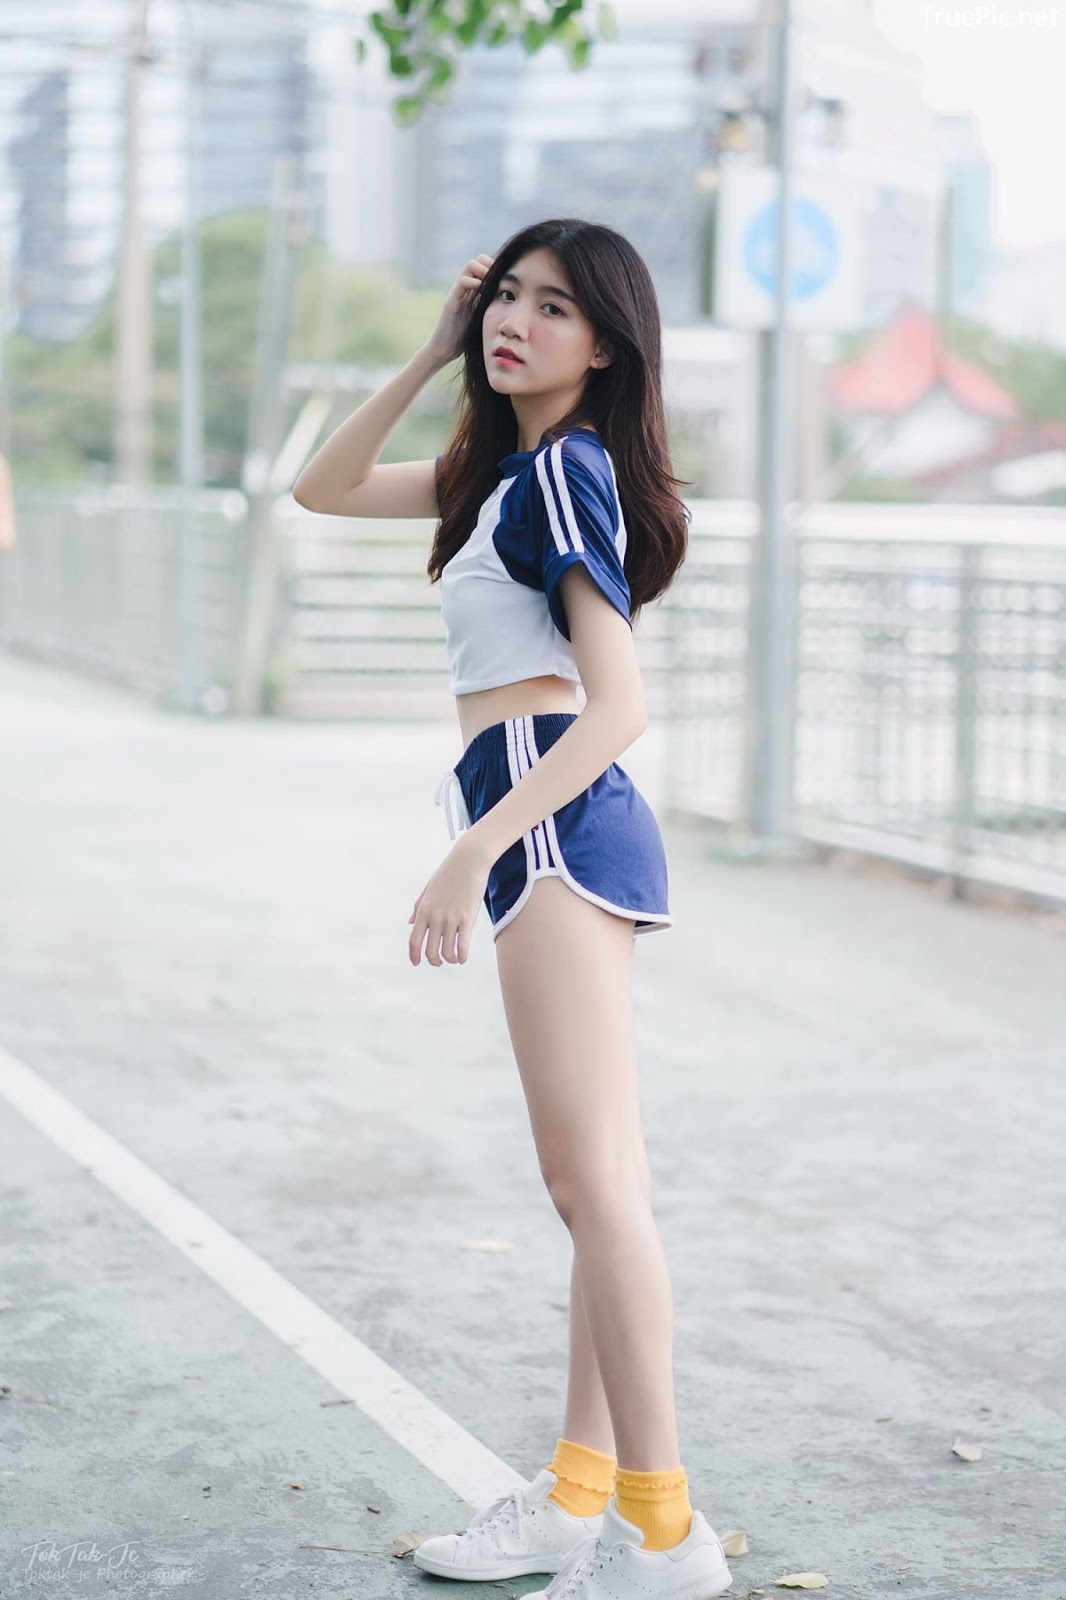 Hot Girl Thailand - Sasi Ngiunwan - Scenes From an Empty City - TruePic.net - Picture 1